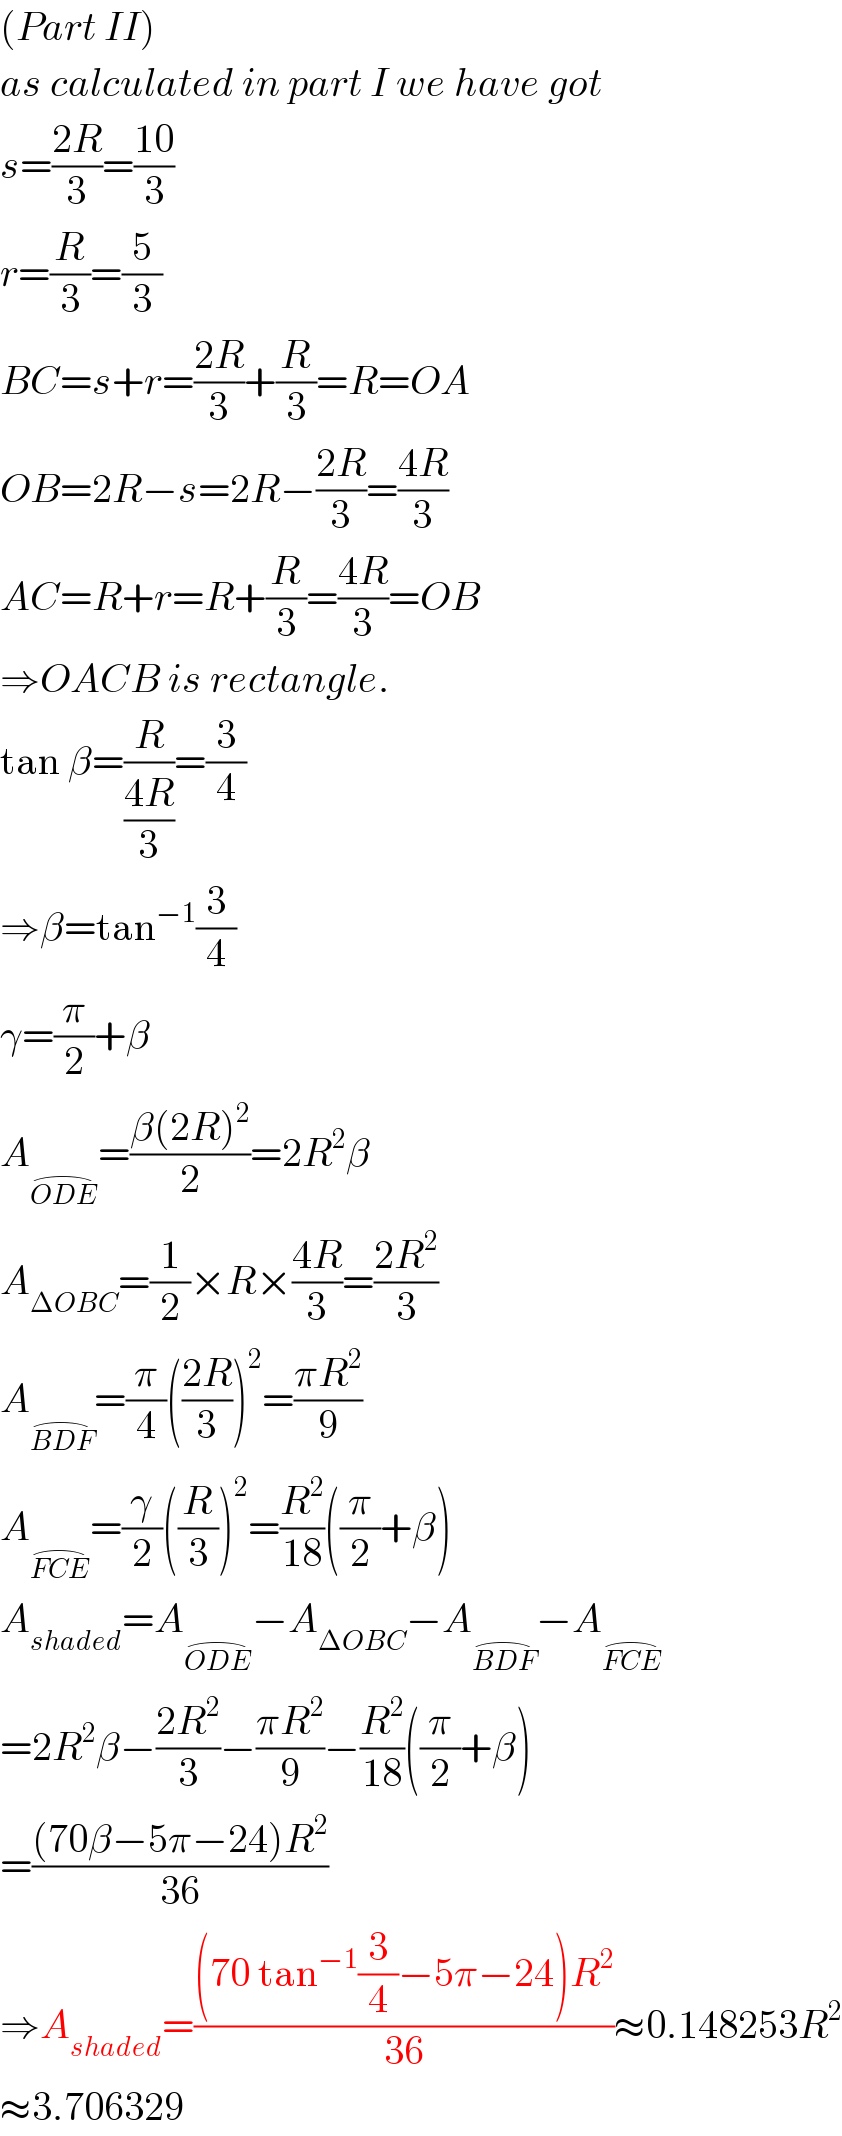 (Part II)  as calculated in part I we have got  s=((2R)/3)=((10)/3)  r=(R/3)=(5/3)  BC=s+r=((2R)/3)+(R/3)=R=OA  OB=2R−s=2R−((2R)/3)=((4R)/3)  AC=R+r=R+(R/3)=((4R)/3)=OB  ⇒OACB is rectangle.  tan β=(R/((4R)/3))=(3/4)  ⇒β=tan^(−1) (3/4)  γ=(π/2)+β  A_(ODE^(⌢) ) =((β(2R)^2 )/2)=2R^2 β  A_(ΔOBC) =(1/2)×R×((4R)/3)=((2R^2 )/3)  A_(BDF^(⌢) ) =(π/4)(((2R)/3))^2 =((πR^2 )/9)  A_(FCE^(⌢) ) =(γ/2)((R/3))^2 =(R^2 /(18))((π/2)+β)  A_(shaded) =A_(ODE^(⌢) ) −A_(ΔOBC) −A_(BDF^(⌢) ) −A_(FCE^(⌢) )   =2R^2 β−((2R^2 )/3)−((πR^2 )/9)−(R^2 /(18))((π/2)+β)  =(((70β−5π−24)R^2 )/(36))  ⇒A_(shaded) =(((70 tan^(−1) (3/4)−5π−24)R^2 )/(36))≈0.148253R^2   ≈3.706329  